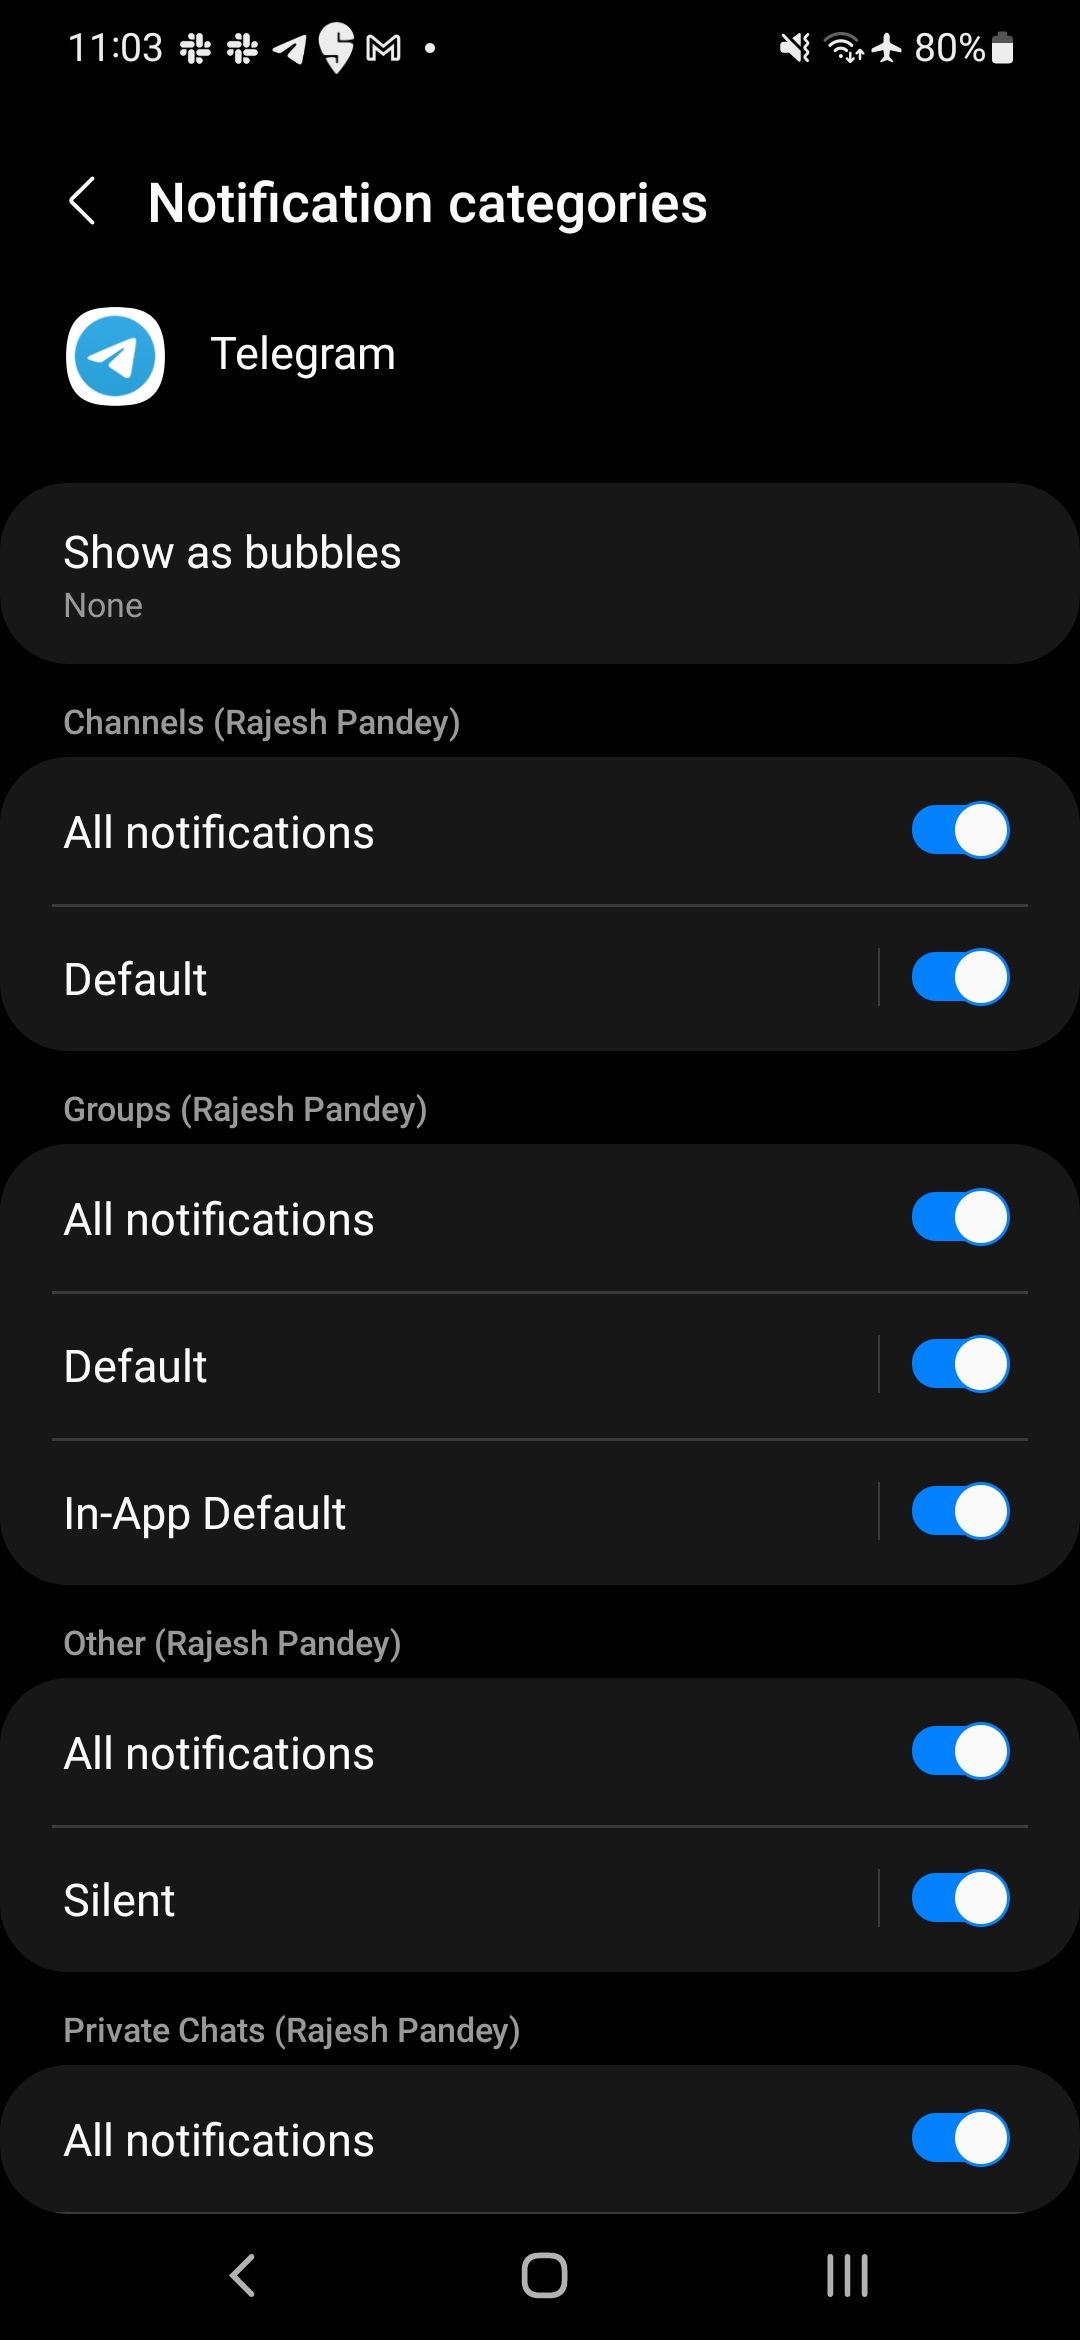 A screenshot of the android notifications channels menu for the Telegram app